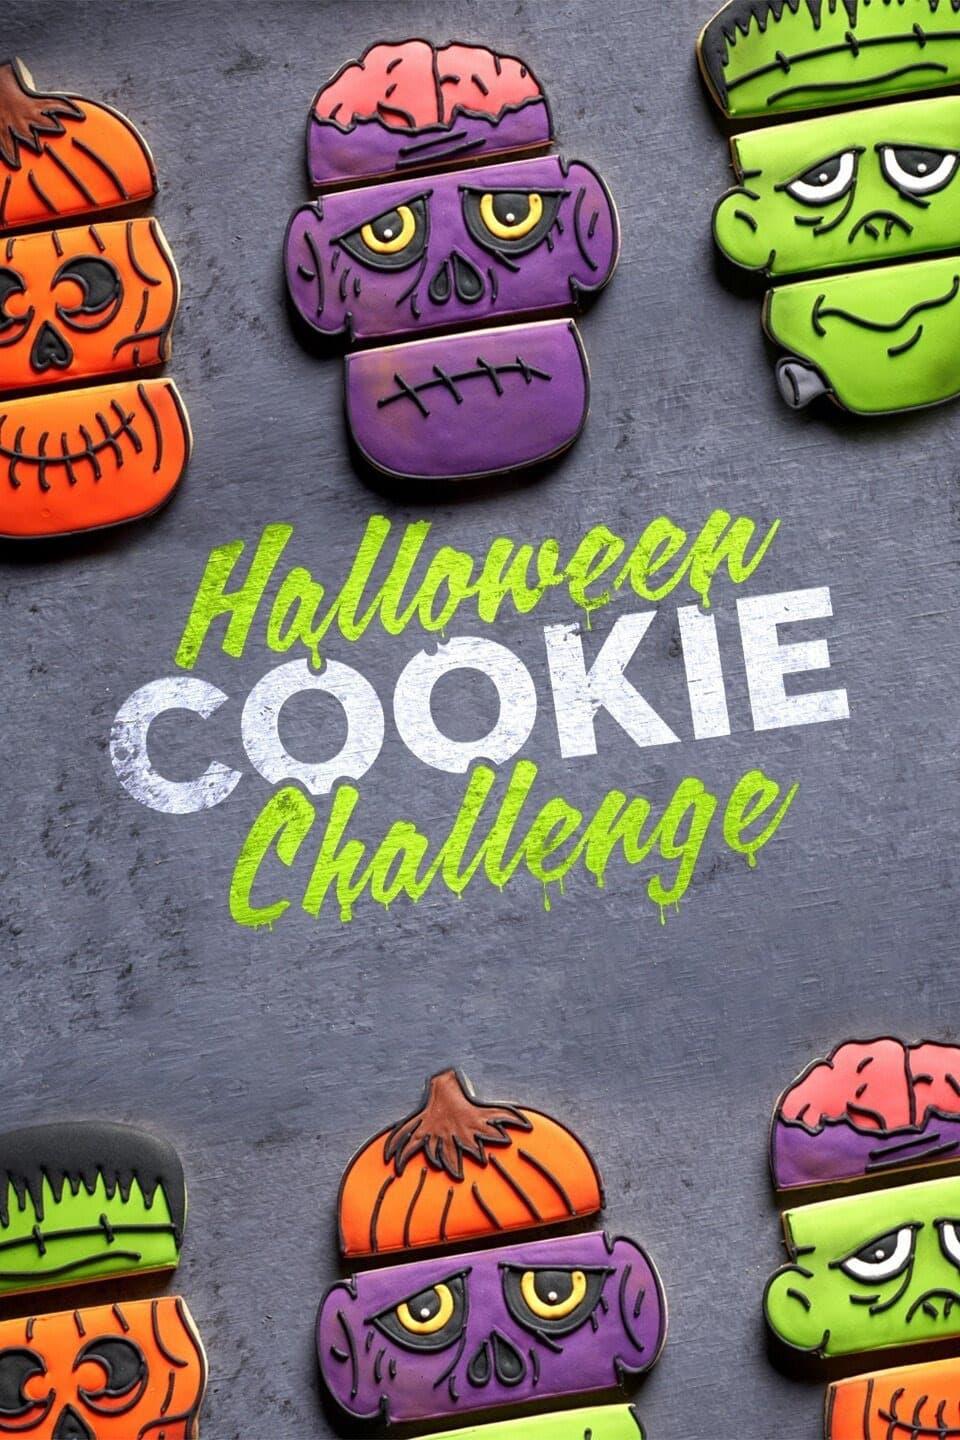 TV ratings for Halloween Cookie Challenge in Poland. Food Network TV series